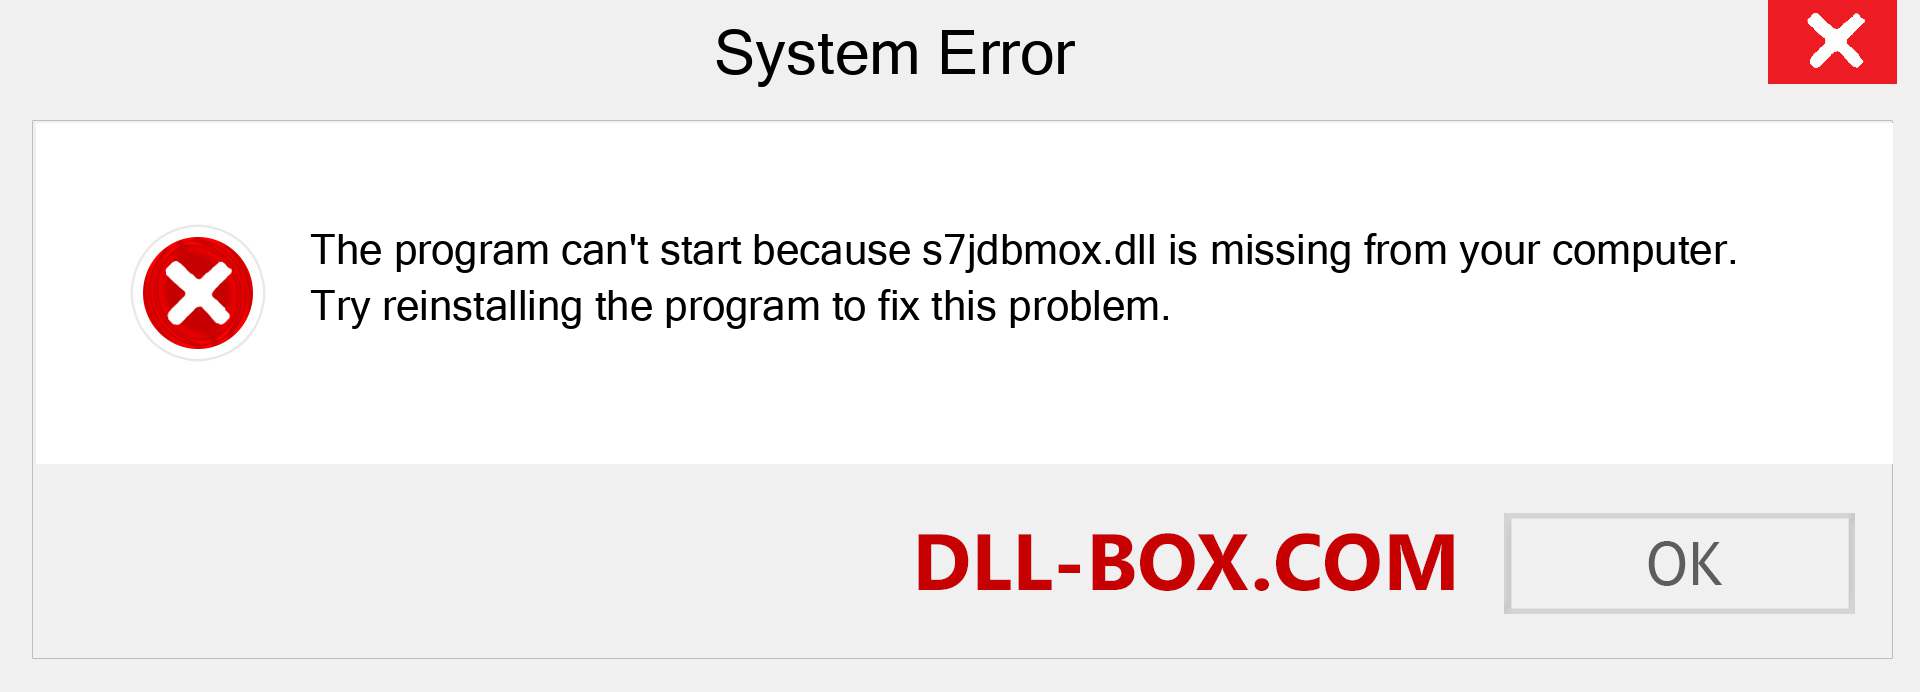  s7jdbmox.dll file is missing?. Download for Windows 7, 8, 10 - Fix  s7jdbmox dll Missing Error on Windows, photos, images